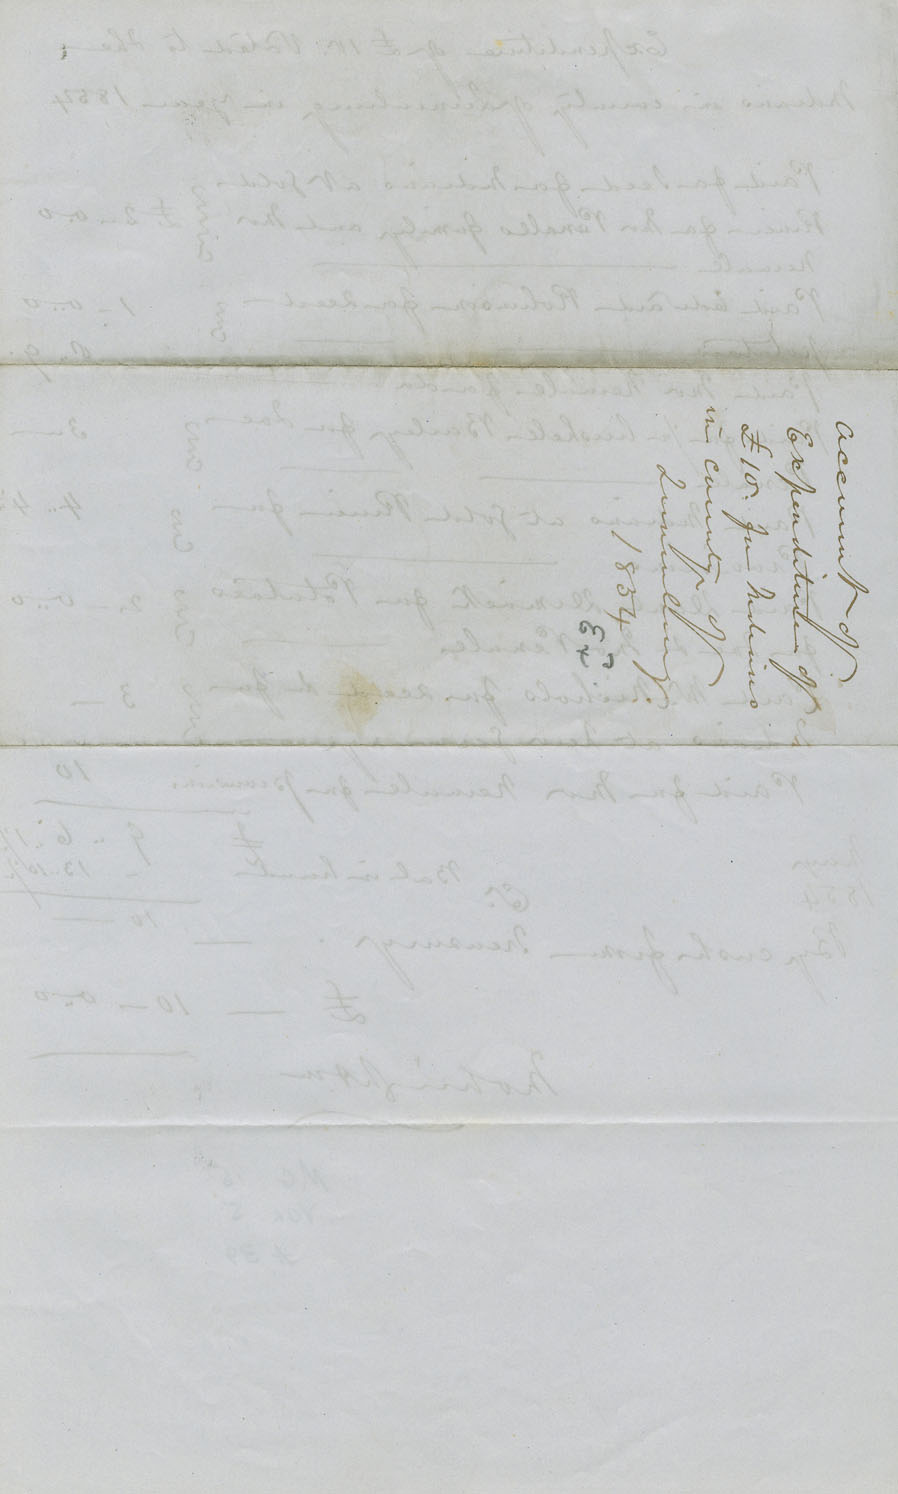 Account of expenditure of £10-0-0 voted to the Mi'kmaq in Lunenburg County in 1854.